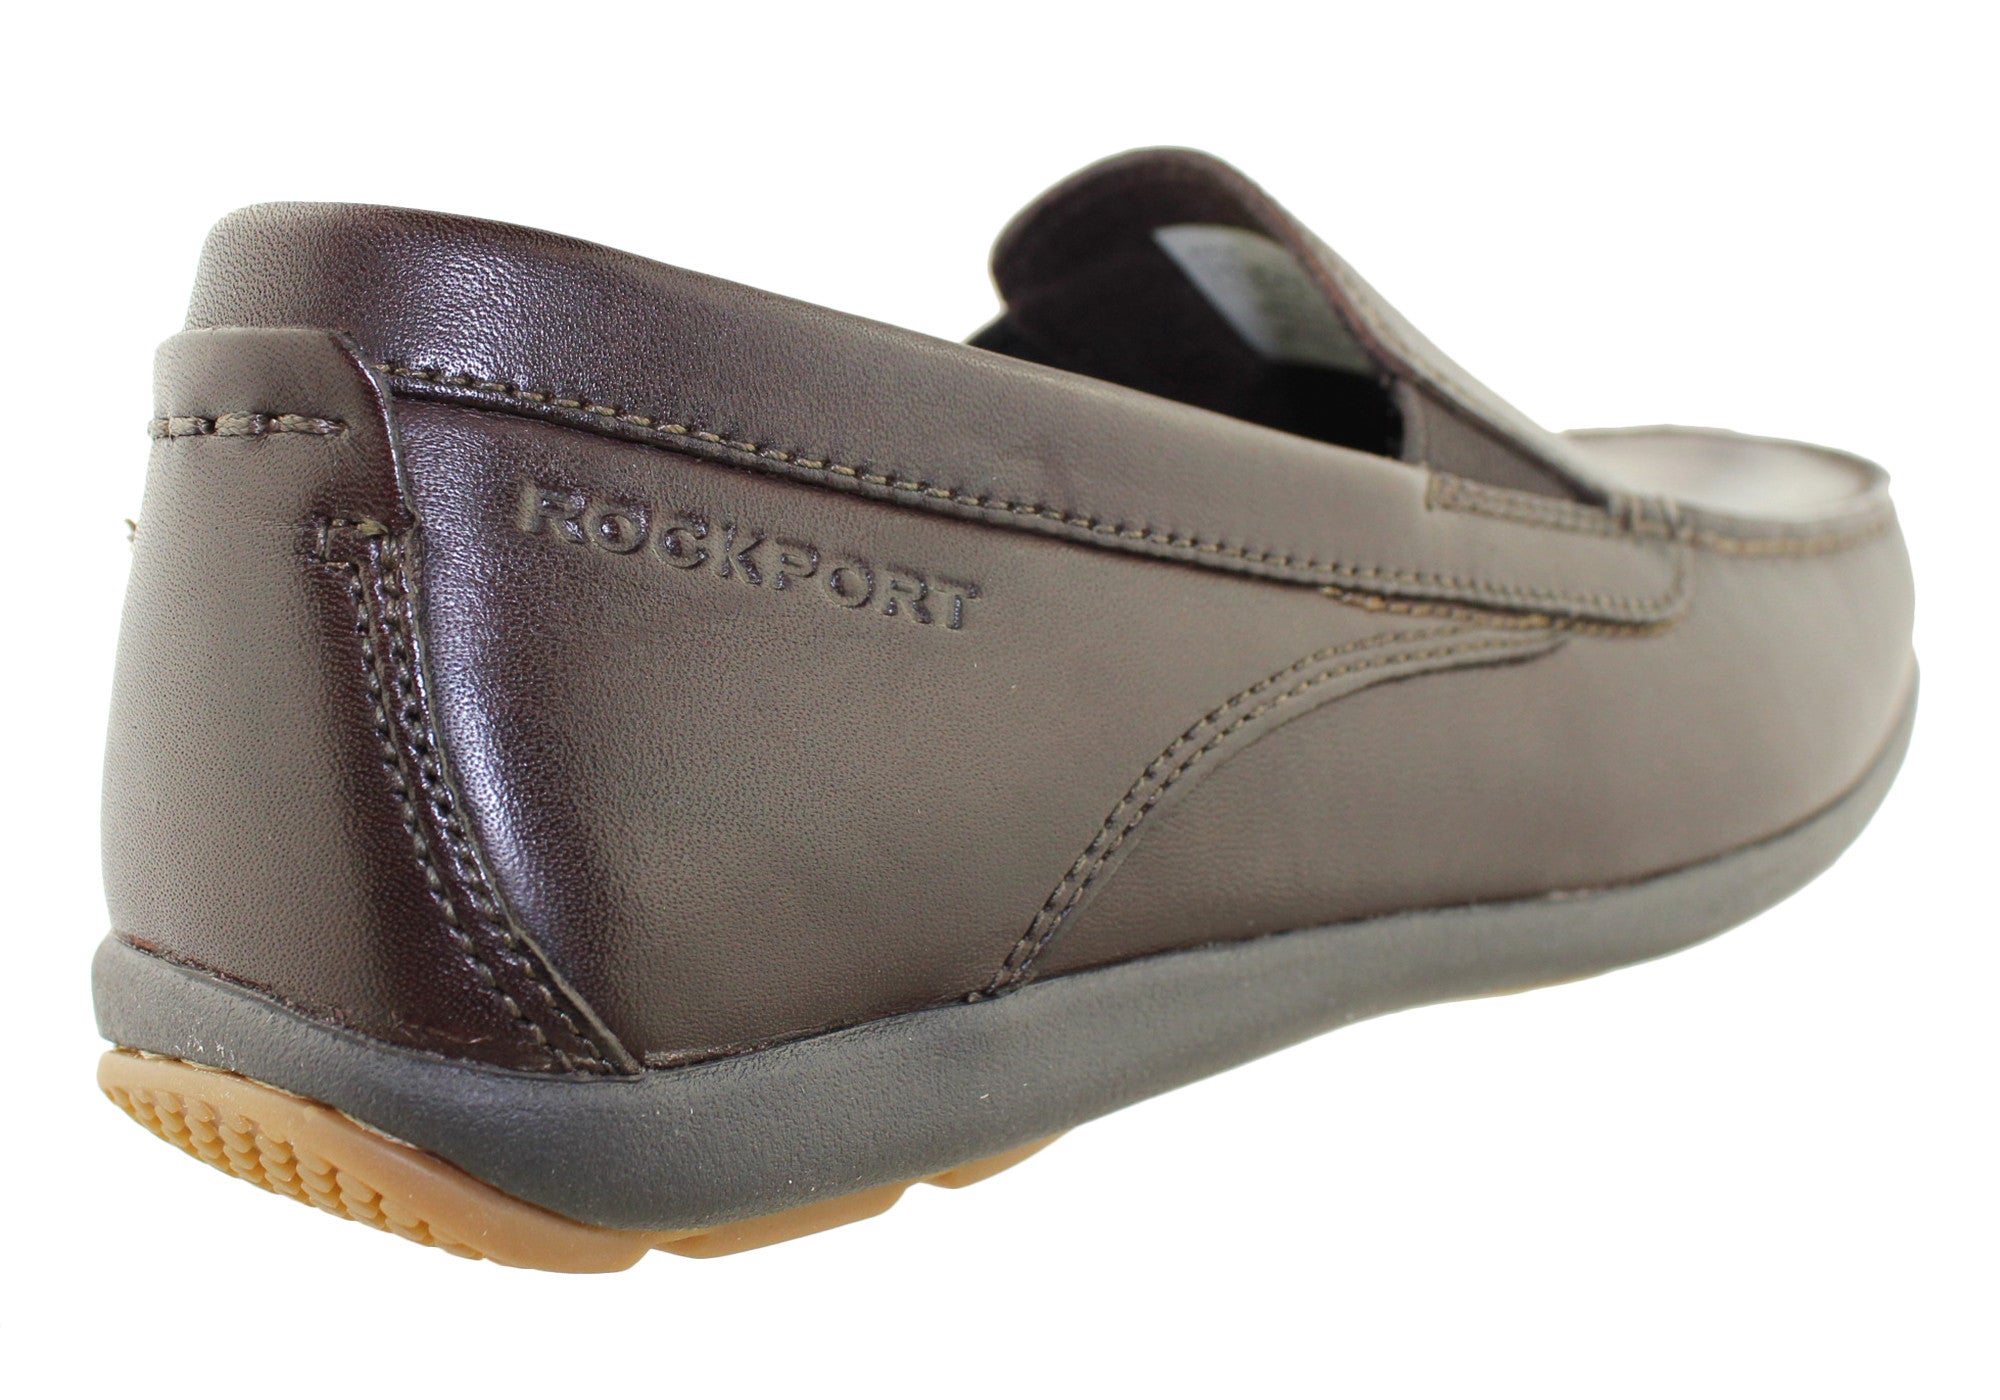 Rockport Cape Noble 2 Mens Comfortable Leather Loafers